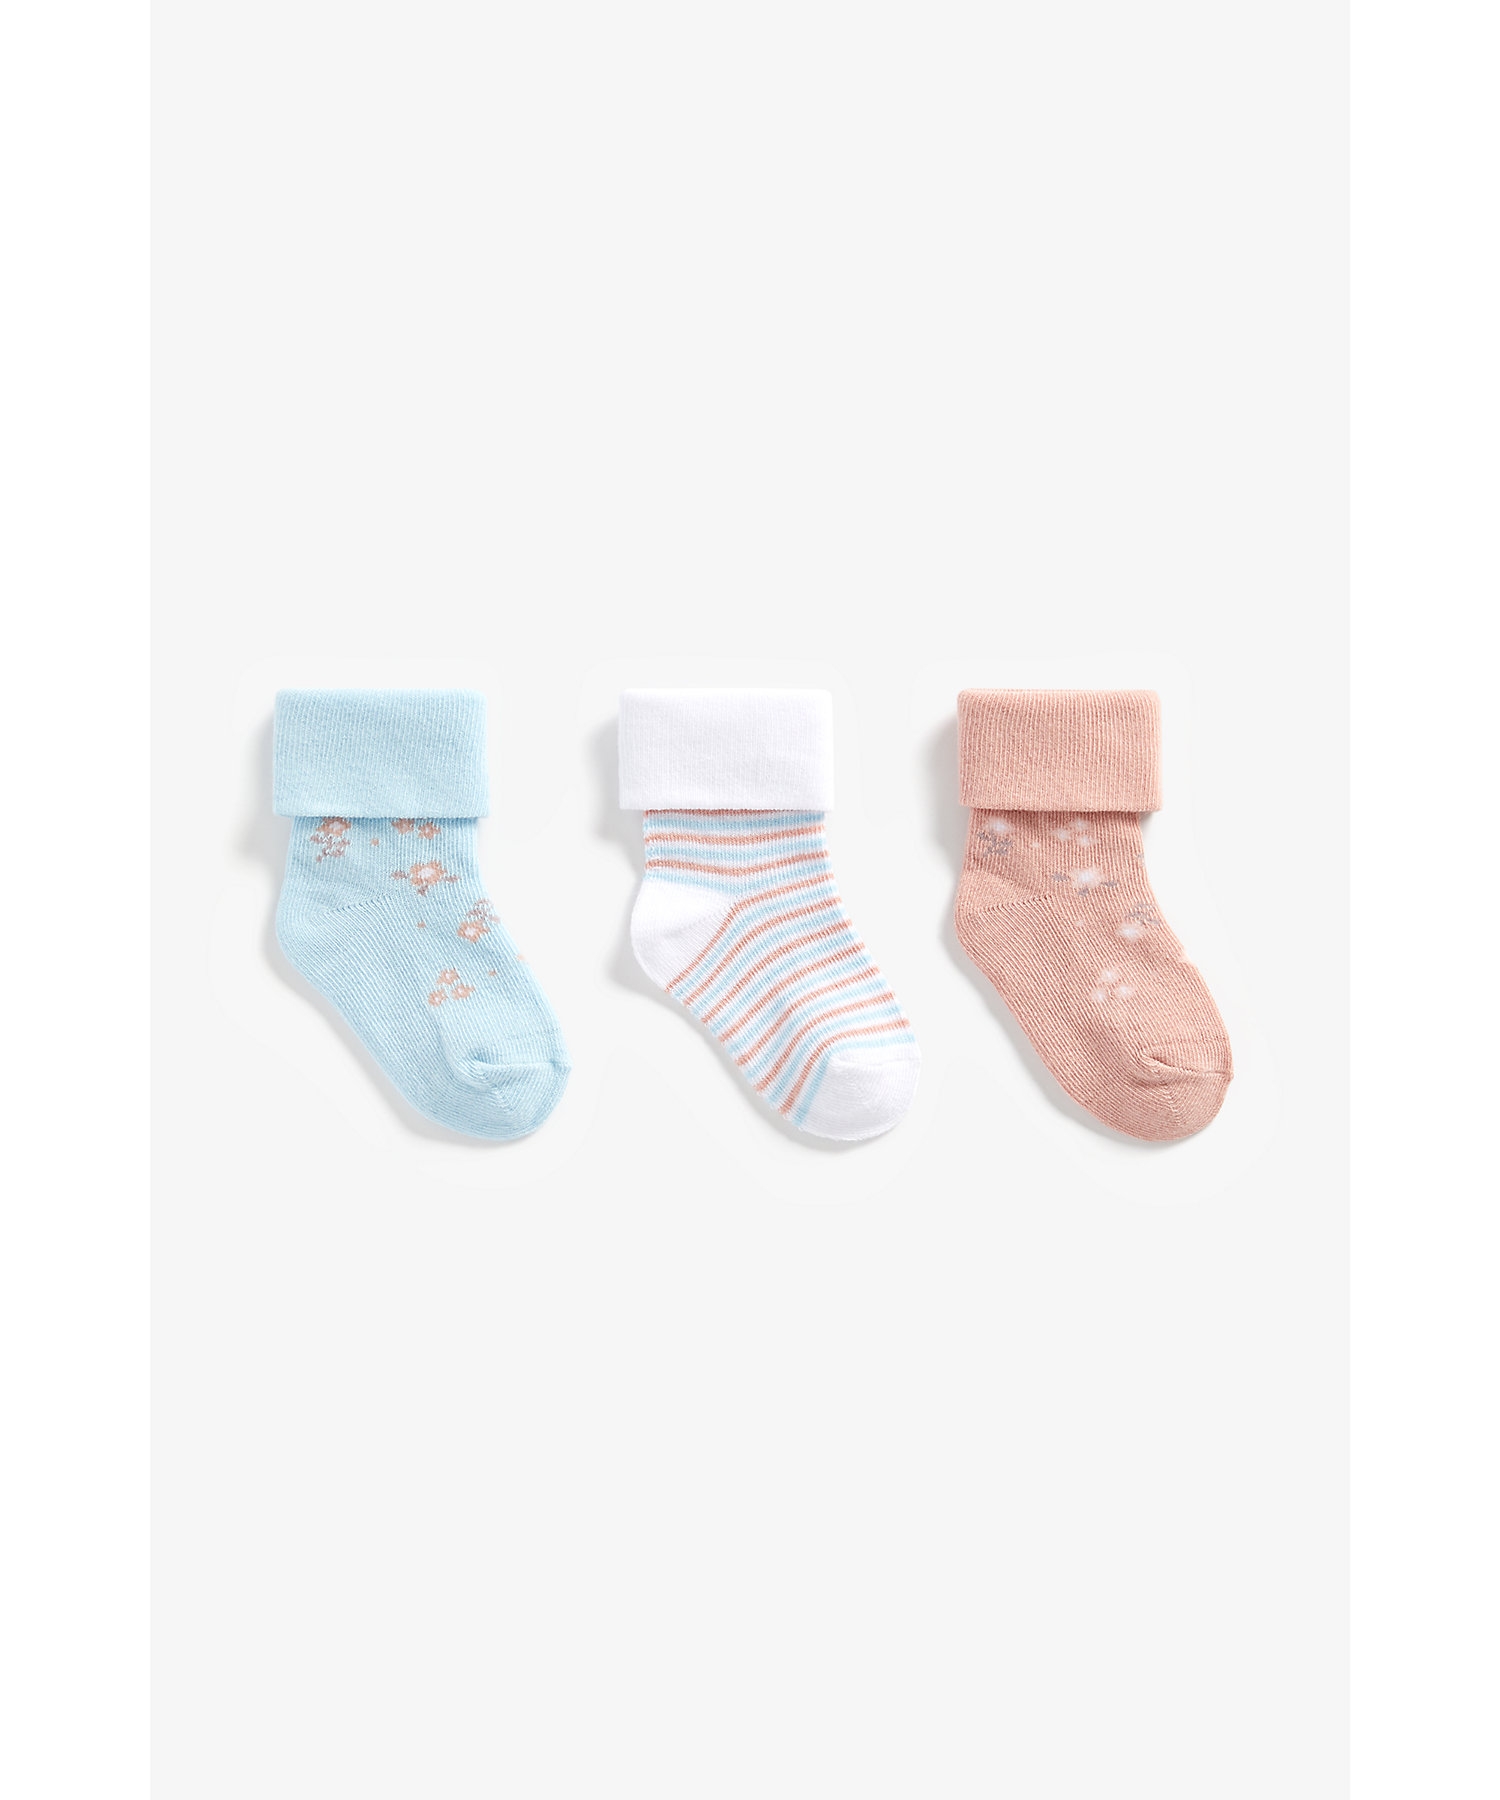 Mothercare | Girls Socks Striped And Floral Design - Pack Of 3 - Multicolor